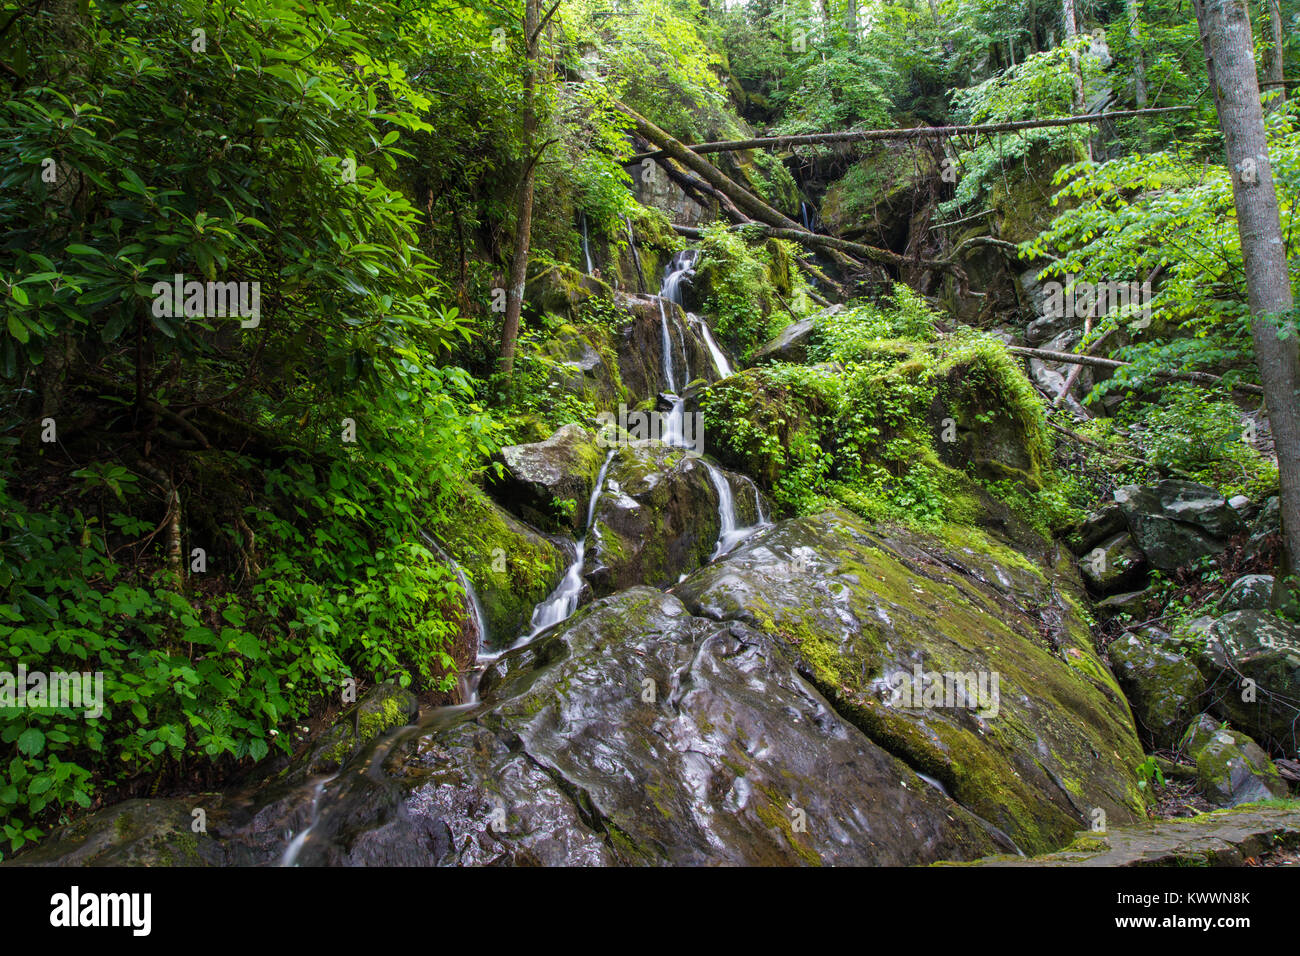 Springtime In The Great Smoky Mountains,  Beautiful seasonal roadside waterfall, Place Of A Thousand Drips, Roaring Fork Motor Nature Trail. Stock Photo